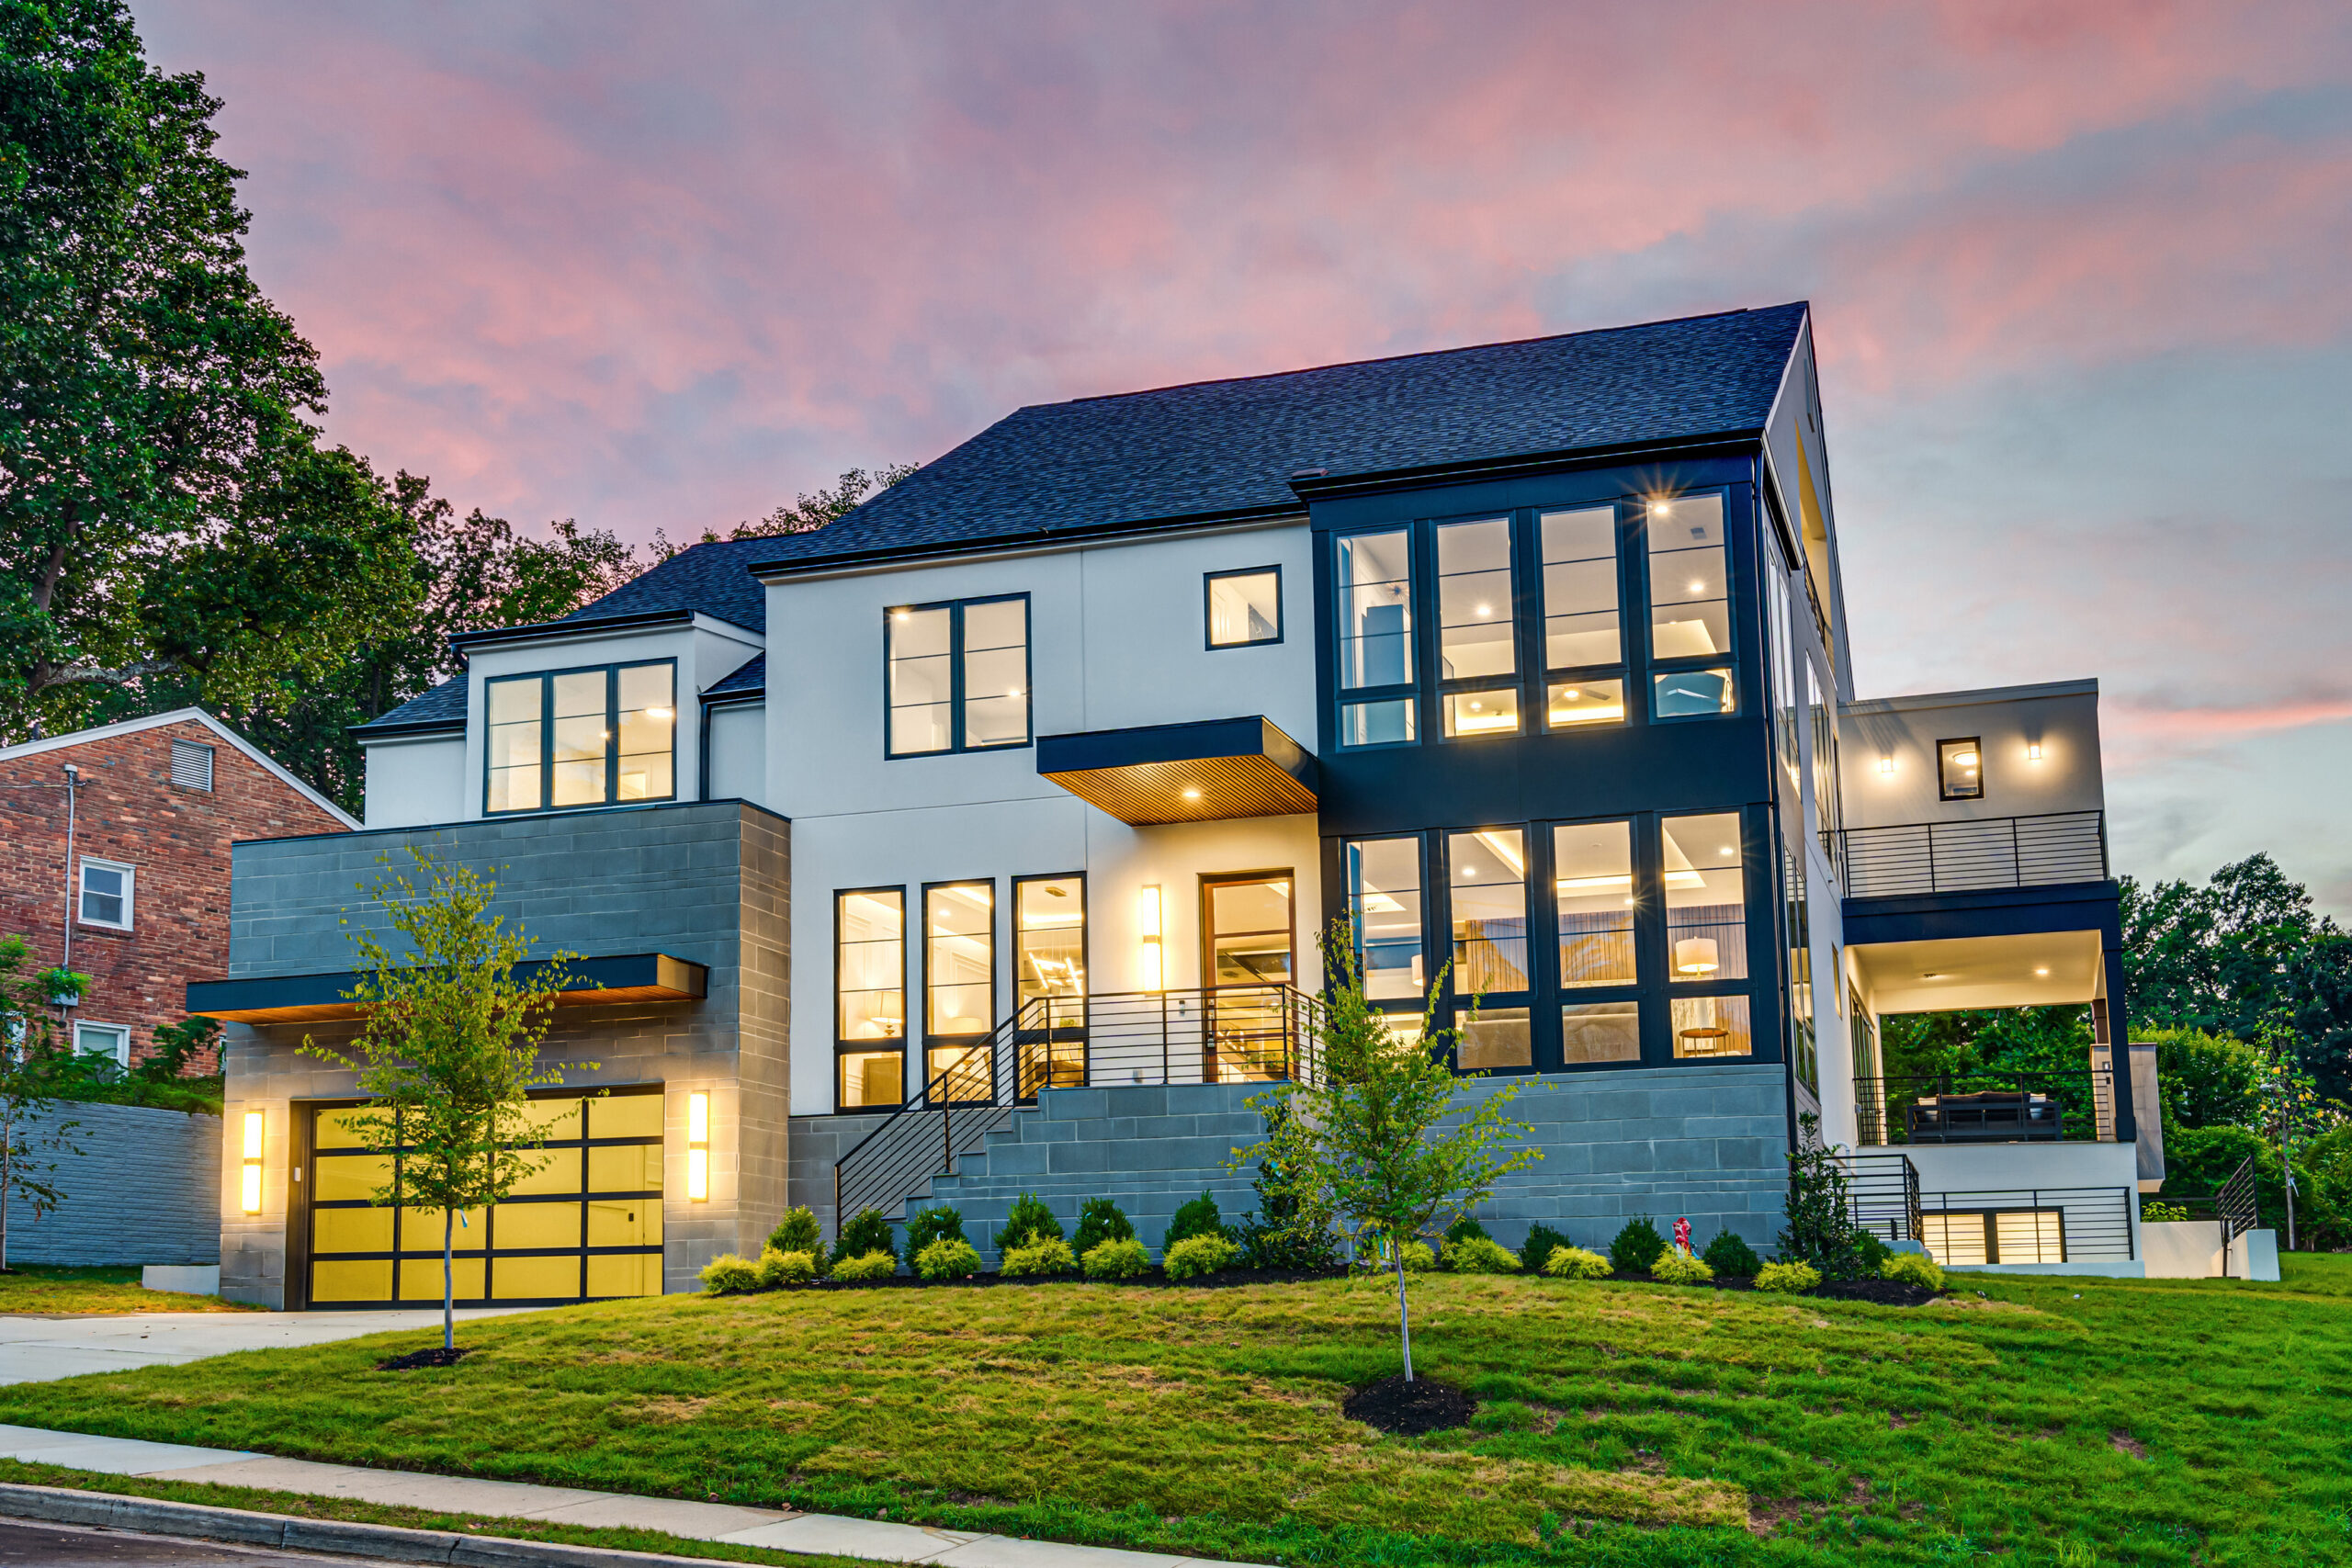 front exterior of a modern new construction home at dusk in arlington virginia